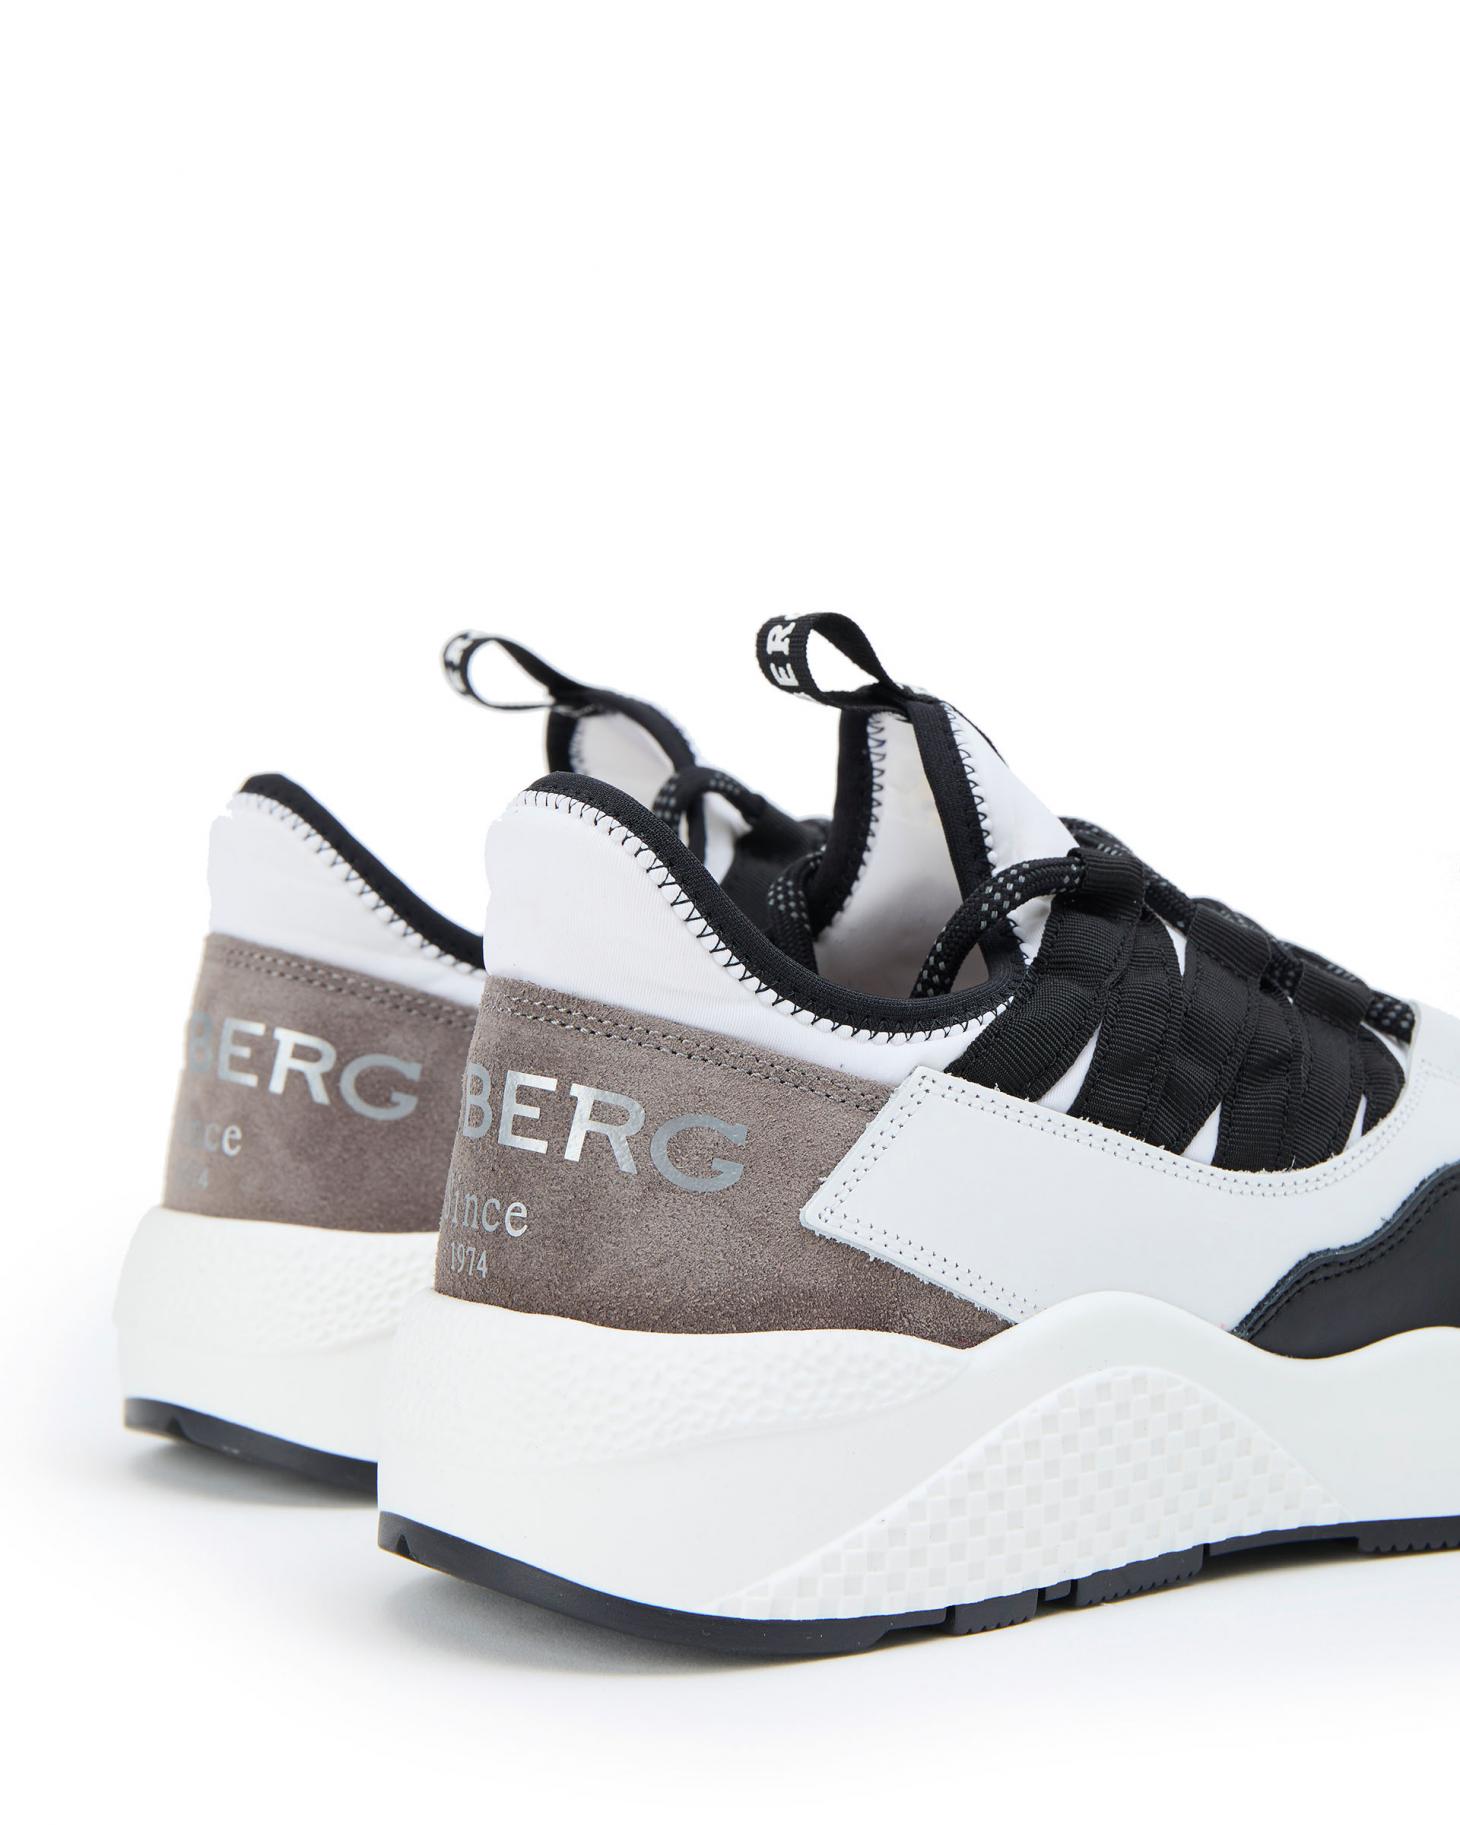 Iceberg Mens Shoes | White, brown, and black leather Iceberg sneakers ...